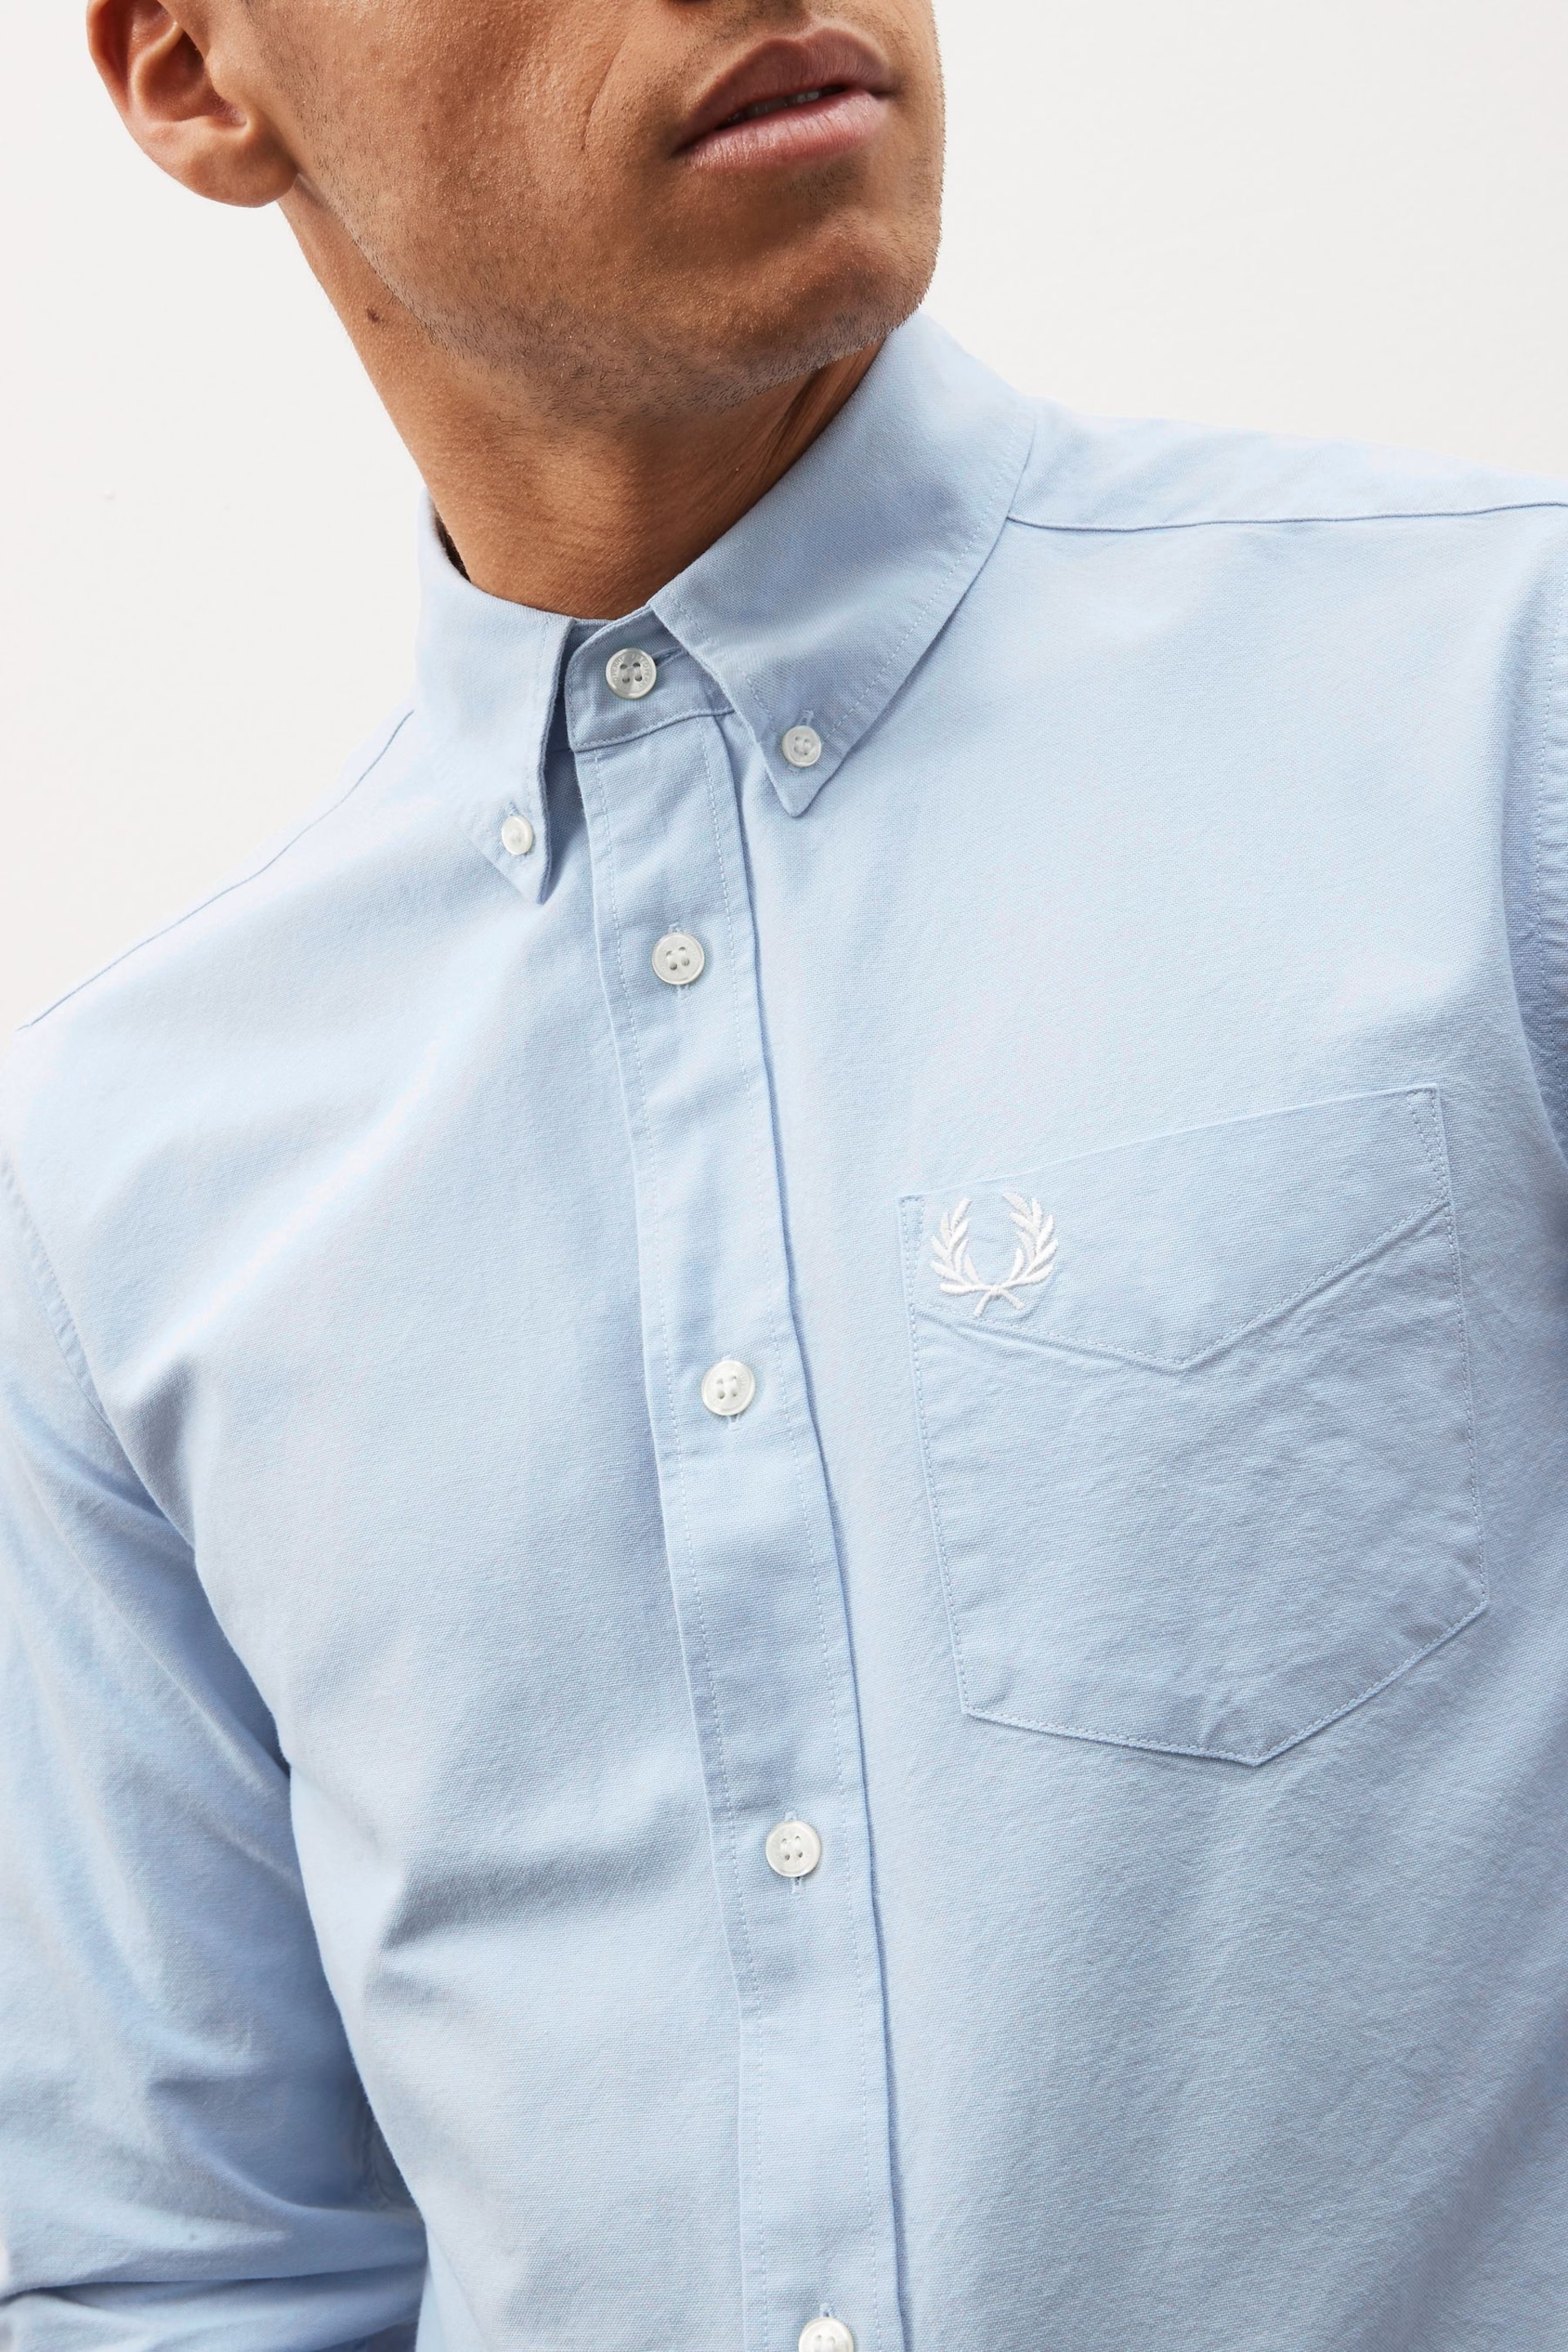 Fred Perry Oxford Shirt - Image 4 of 9